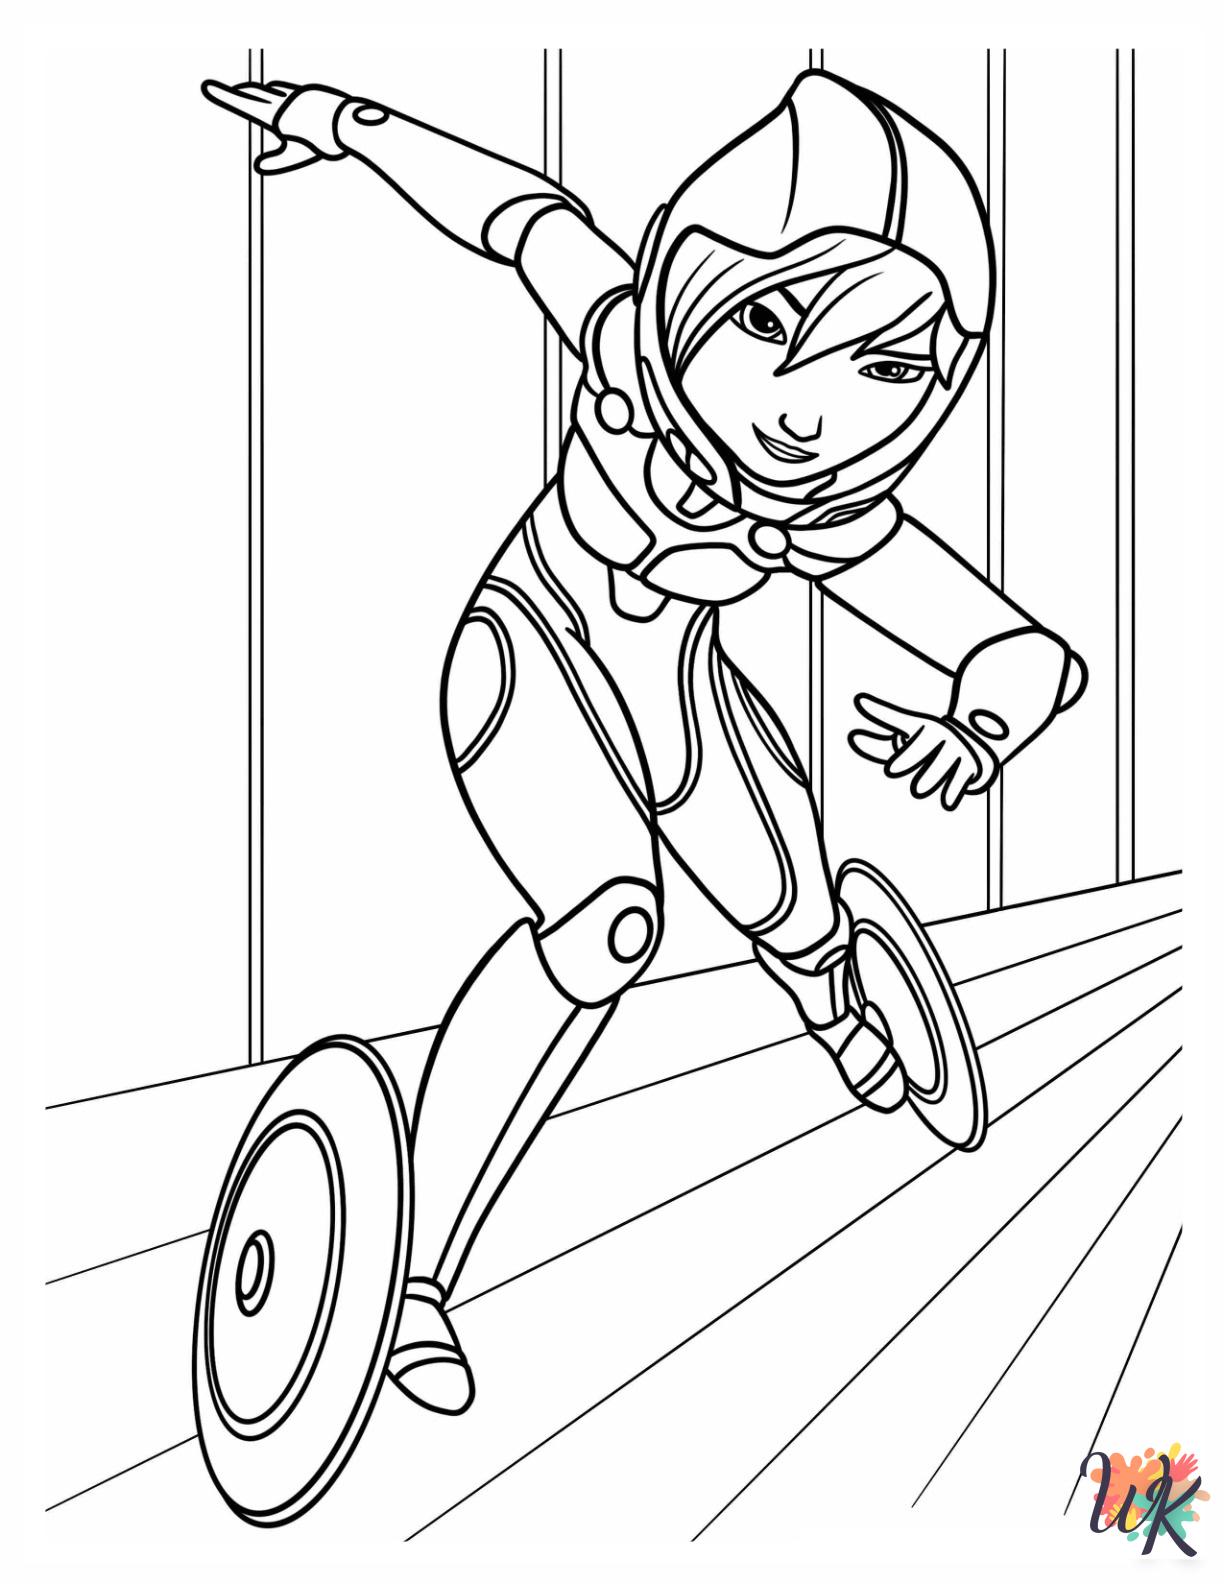 Big Hero 6 Coloring Pages 10